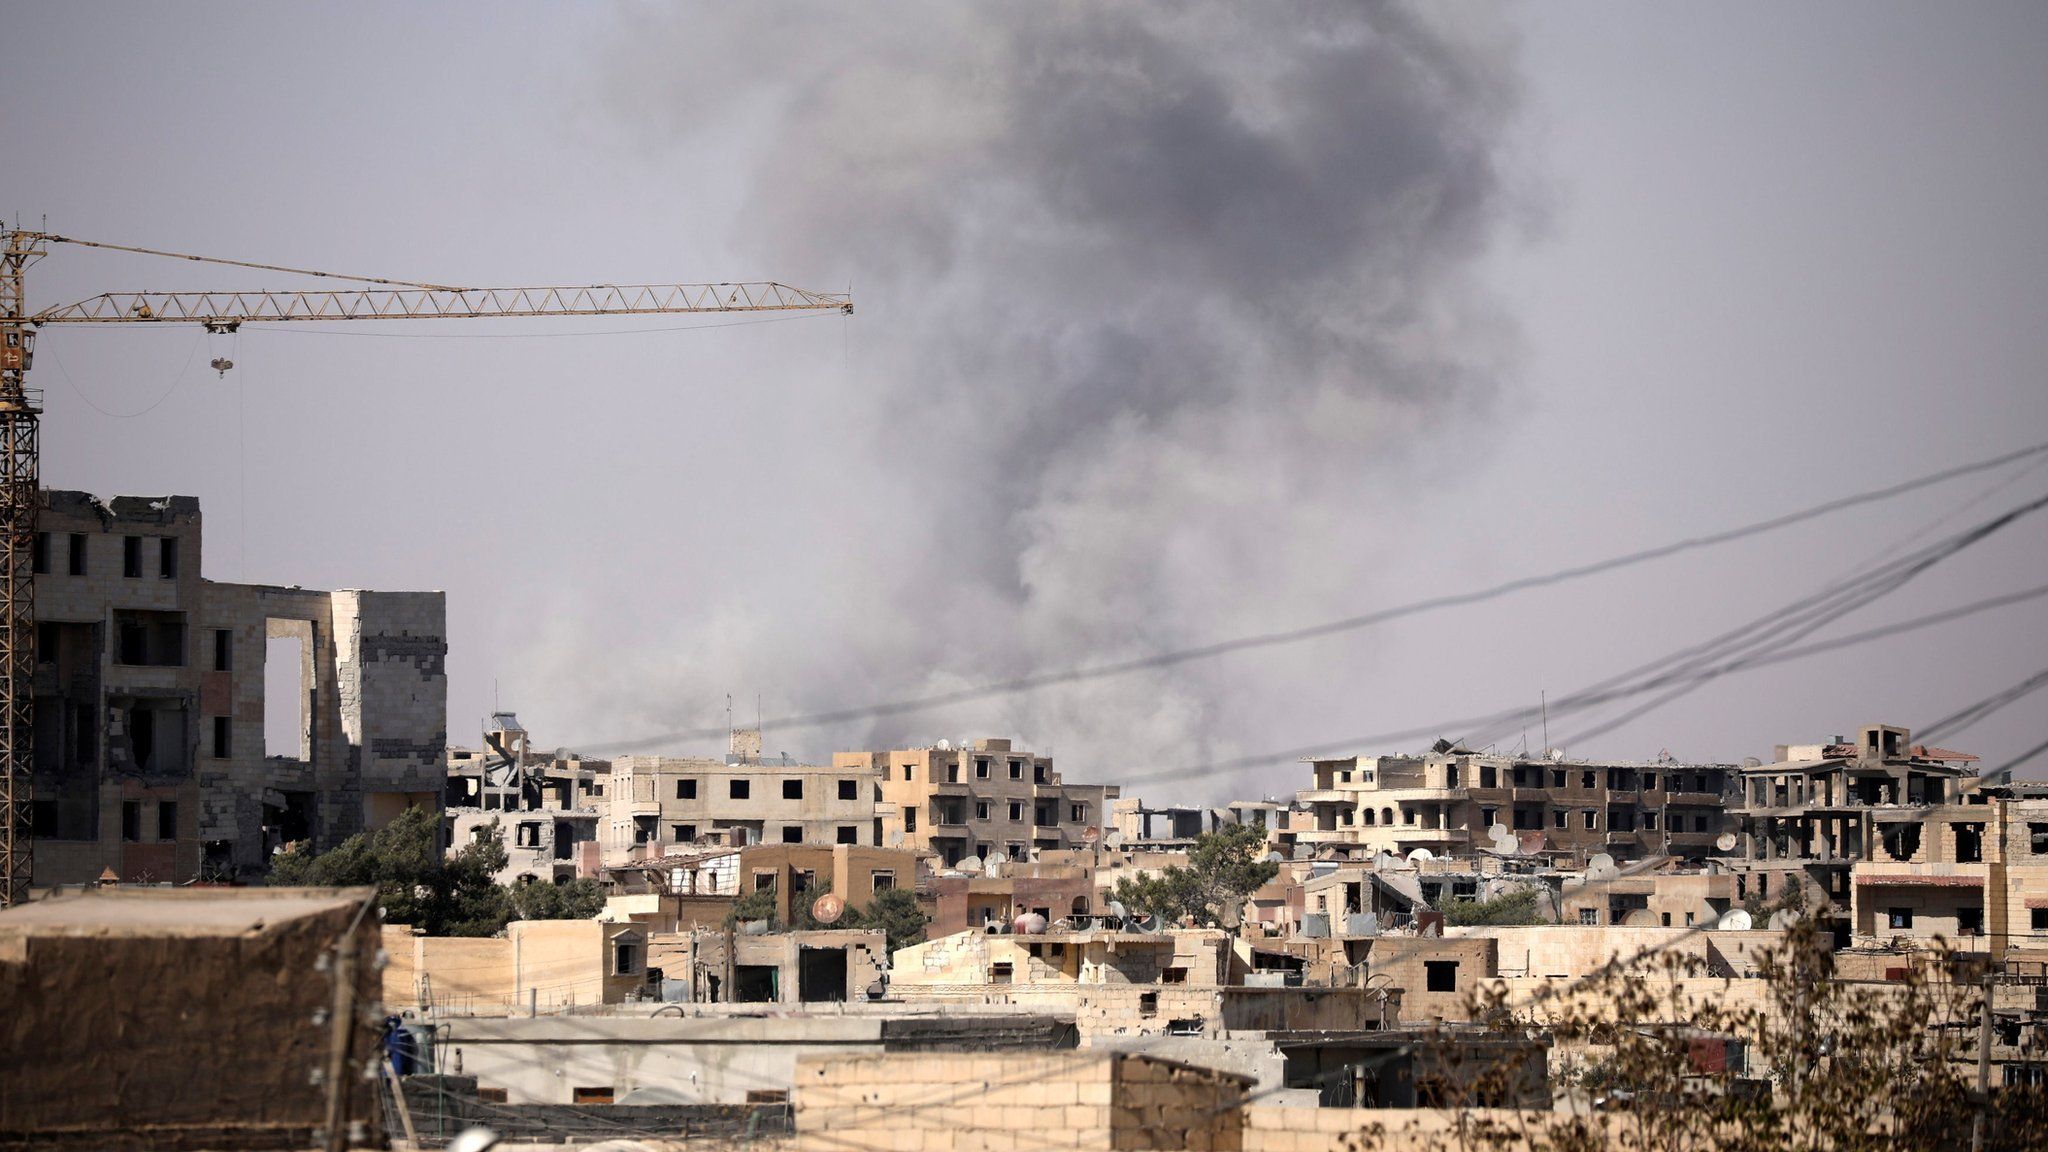 Smoke rises from a building in Raqqa on 31 July